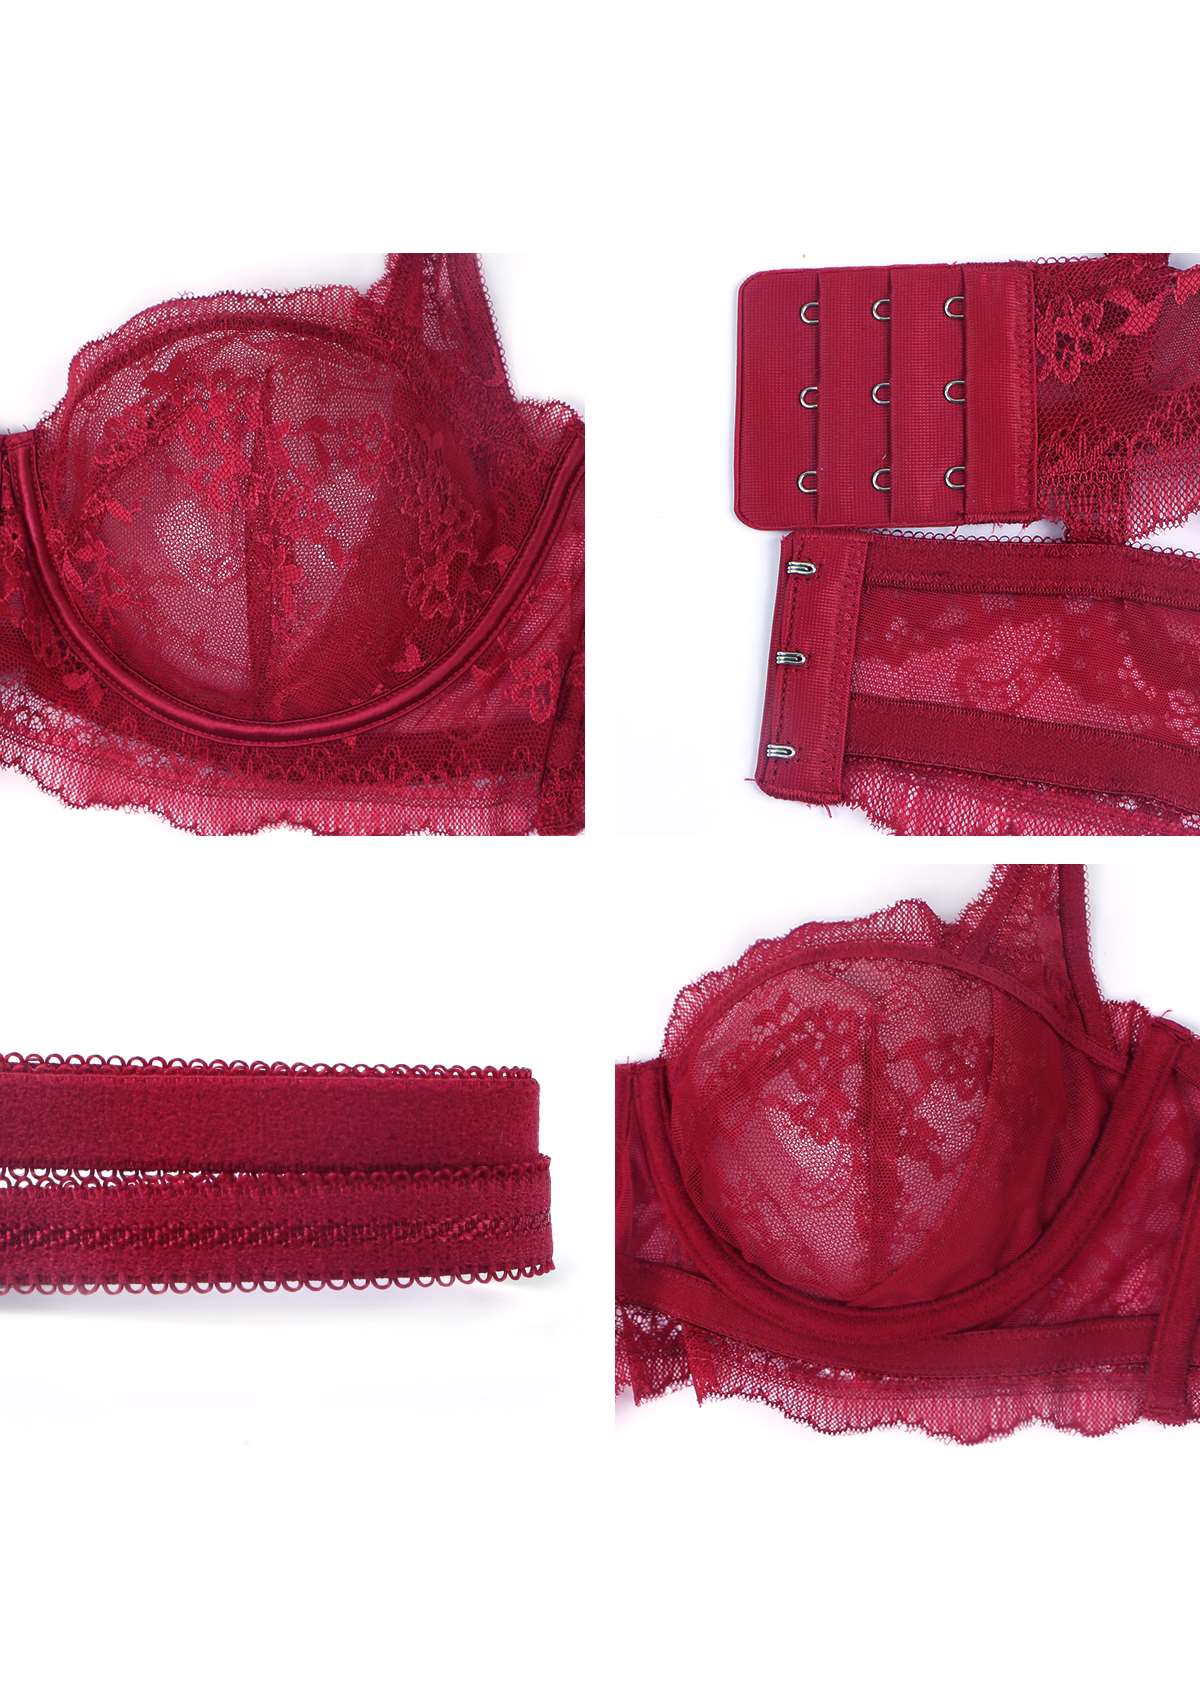 HSIA Floral Lace Unlined Bridal Balconette Bra Set - Supportive Classic - Burgundy / 36 / C